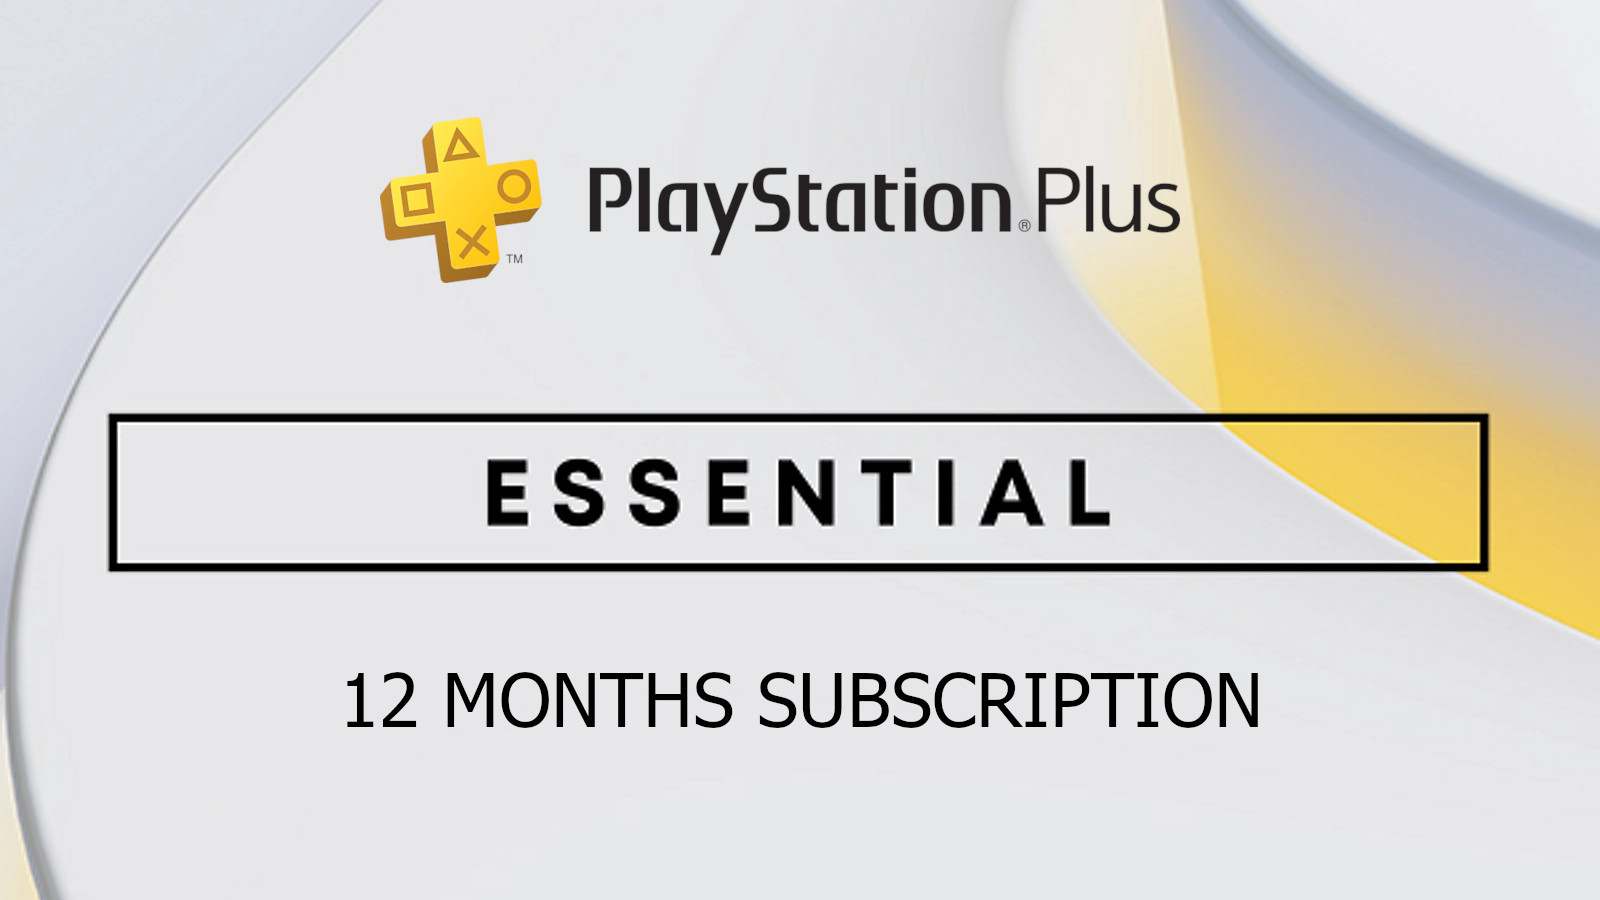 PlayStation Plus Essential 12 Months Subscription FI